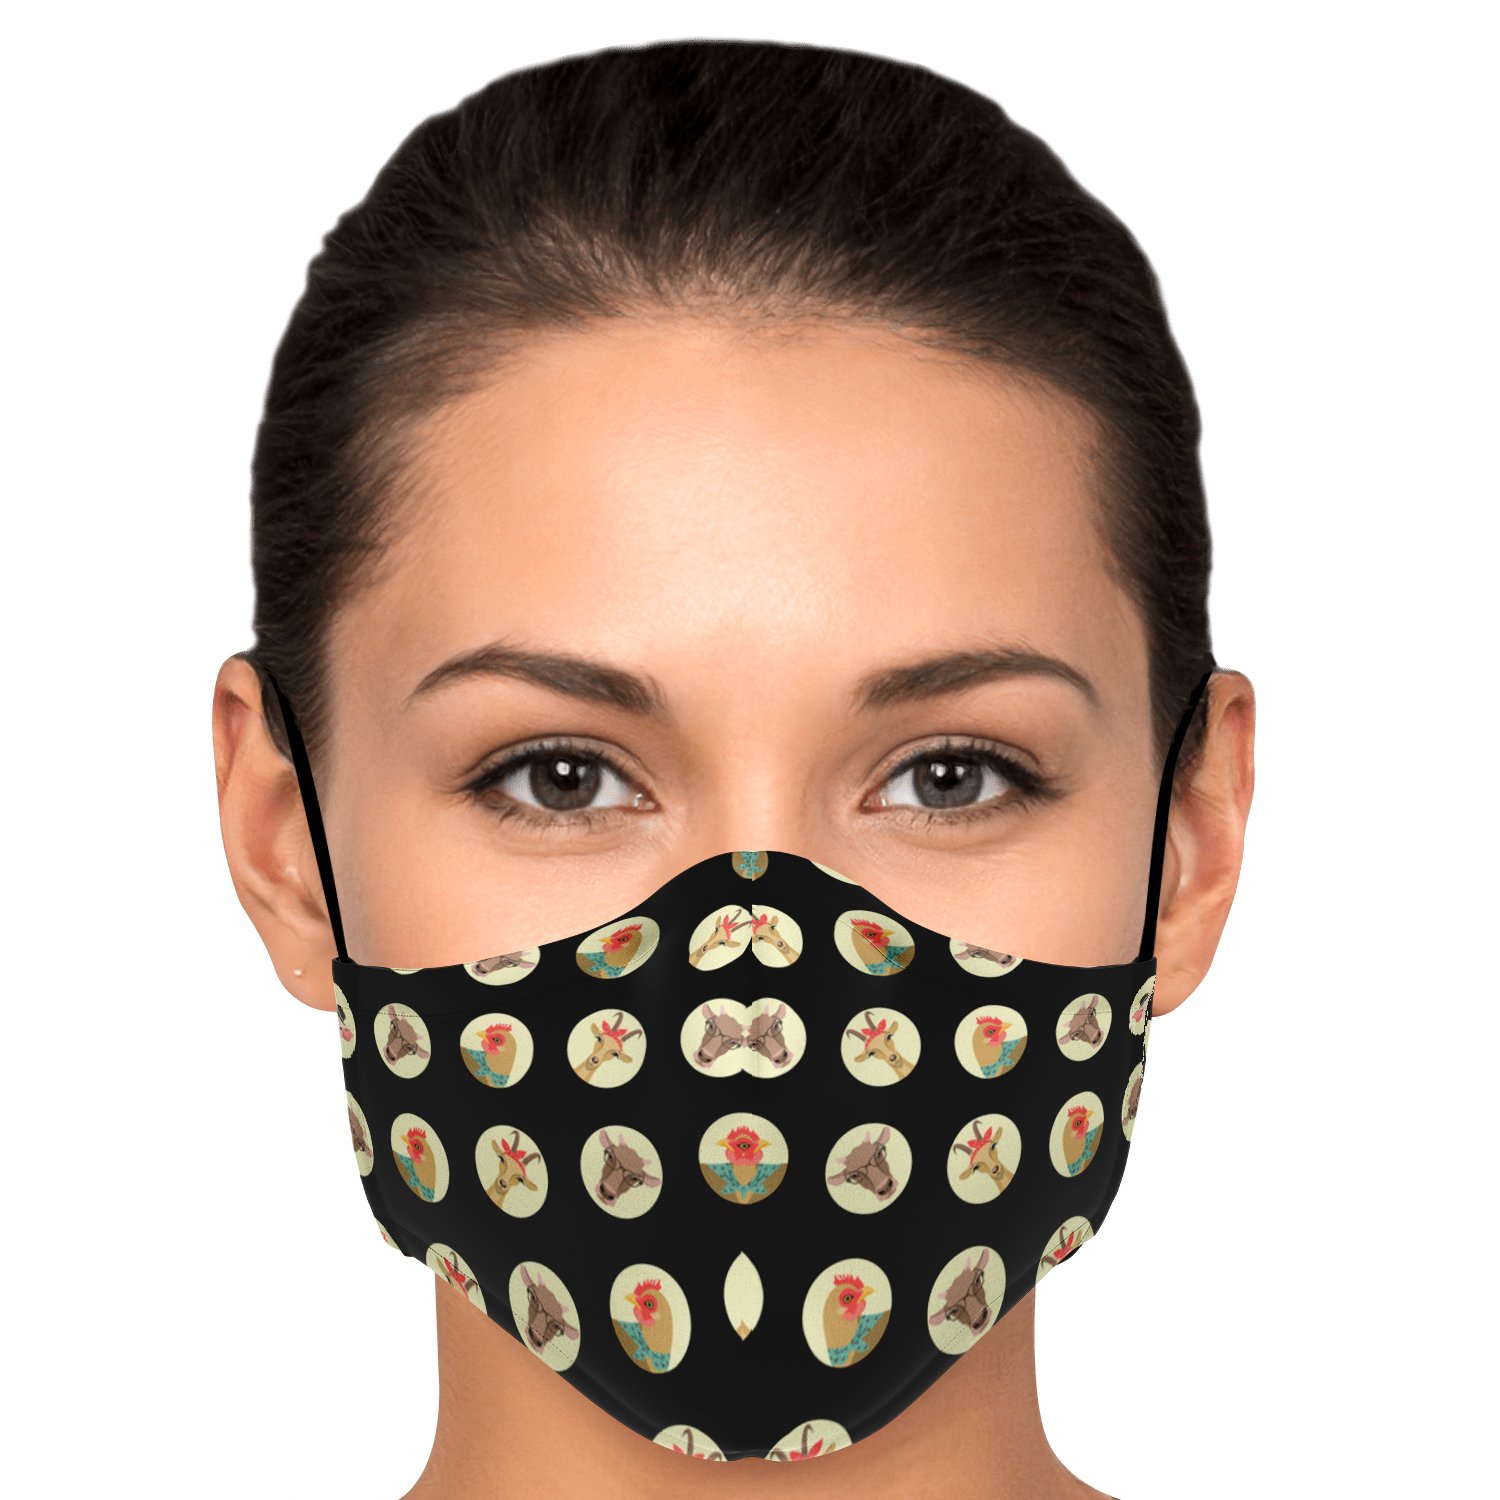 3pcs - Adult Fashion Face Mask / No additional filters Official COW PRINT Merch